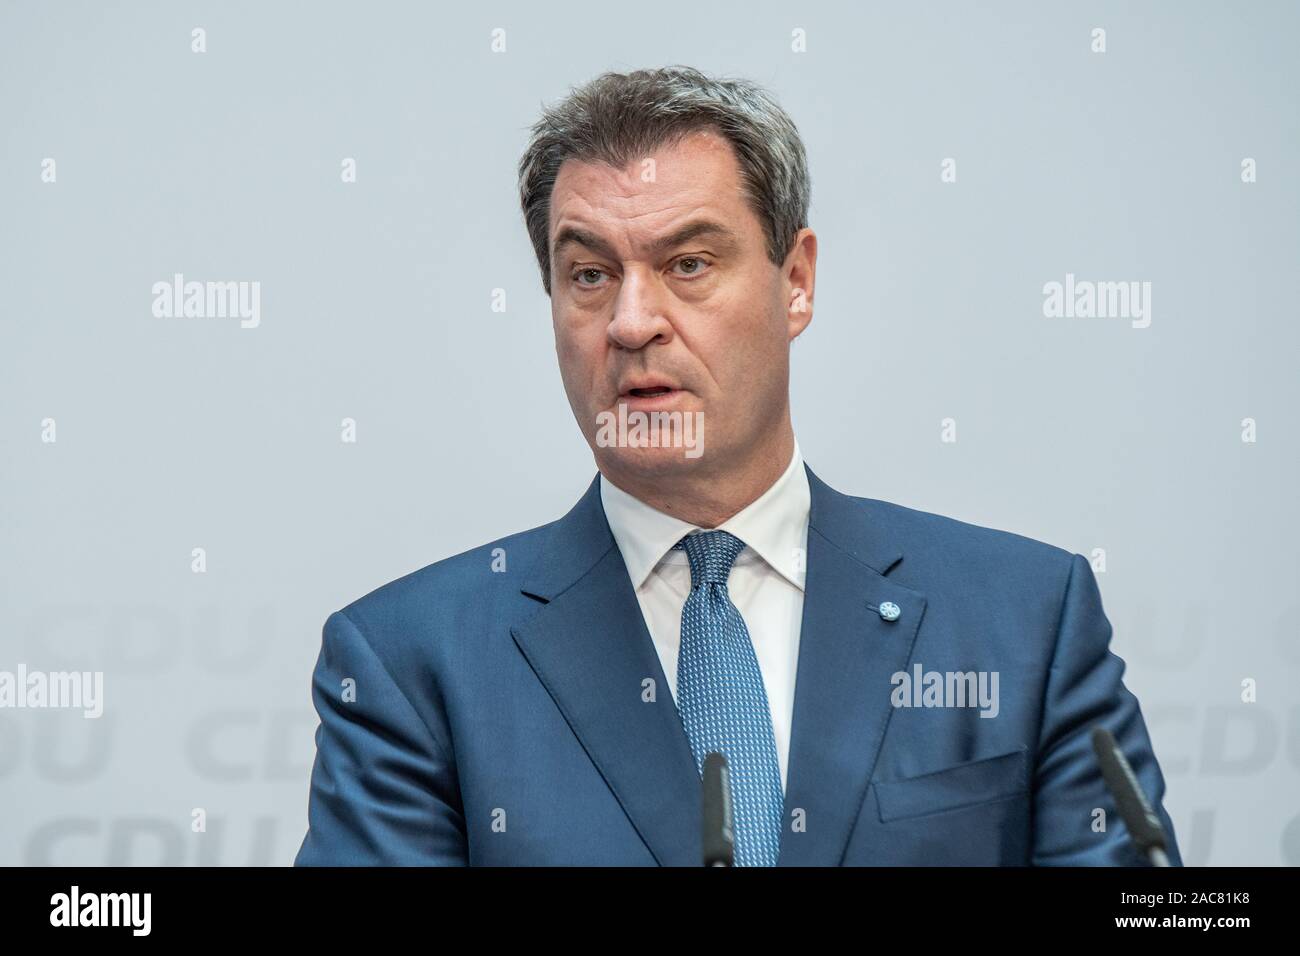 Markus Söder speaking at an election event in May 2019 in Berlin. This photo shows him speaking about the CDU election results as they came in. Stock Photo